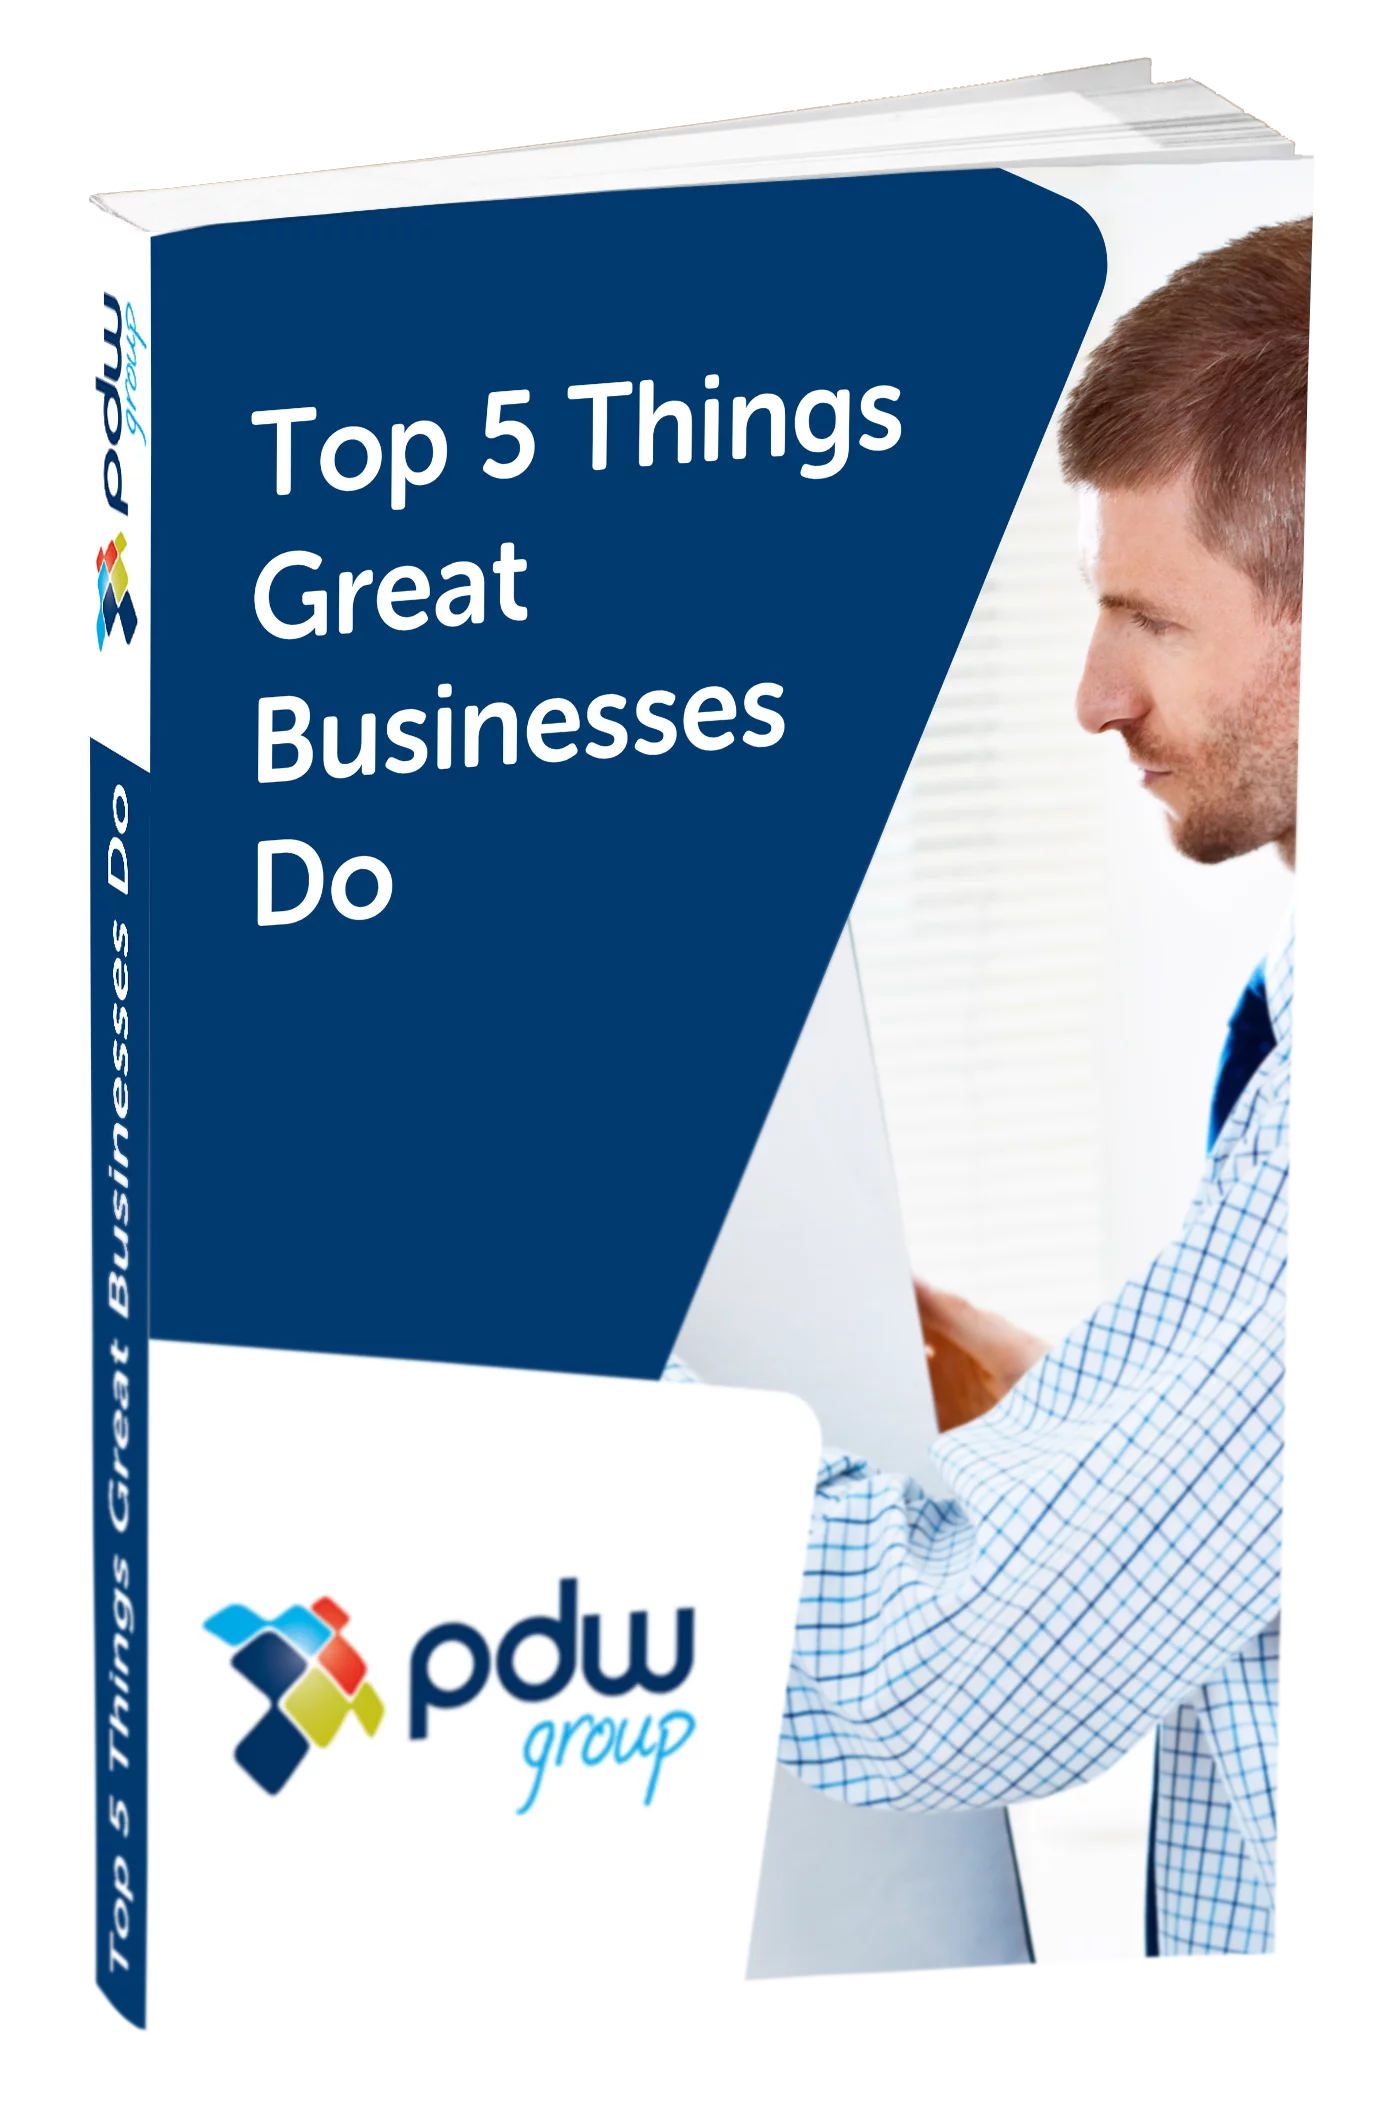 Top 5 Things Great Businesses Do Guide